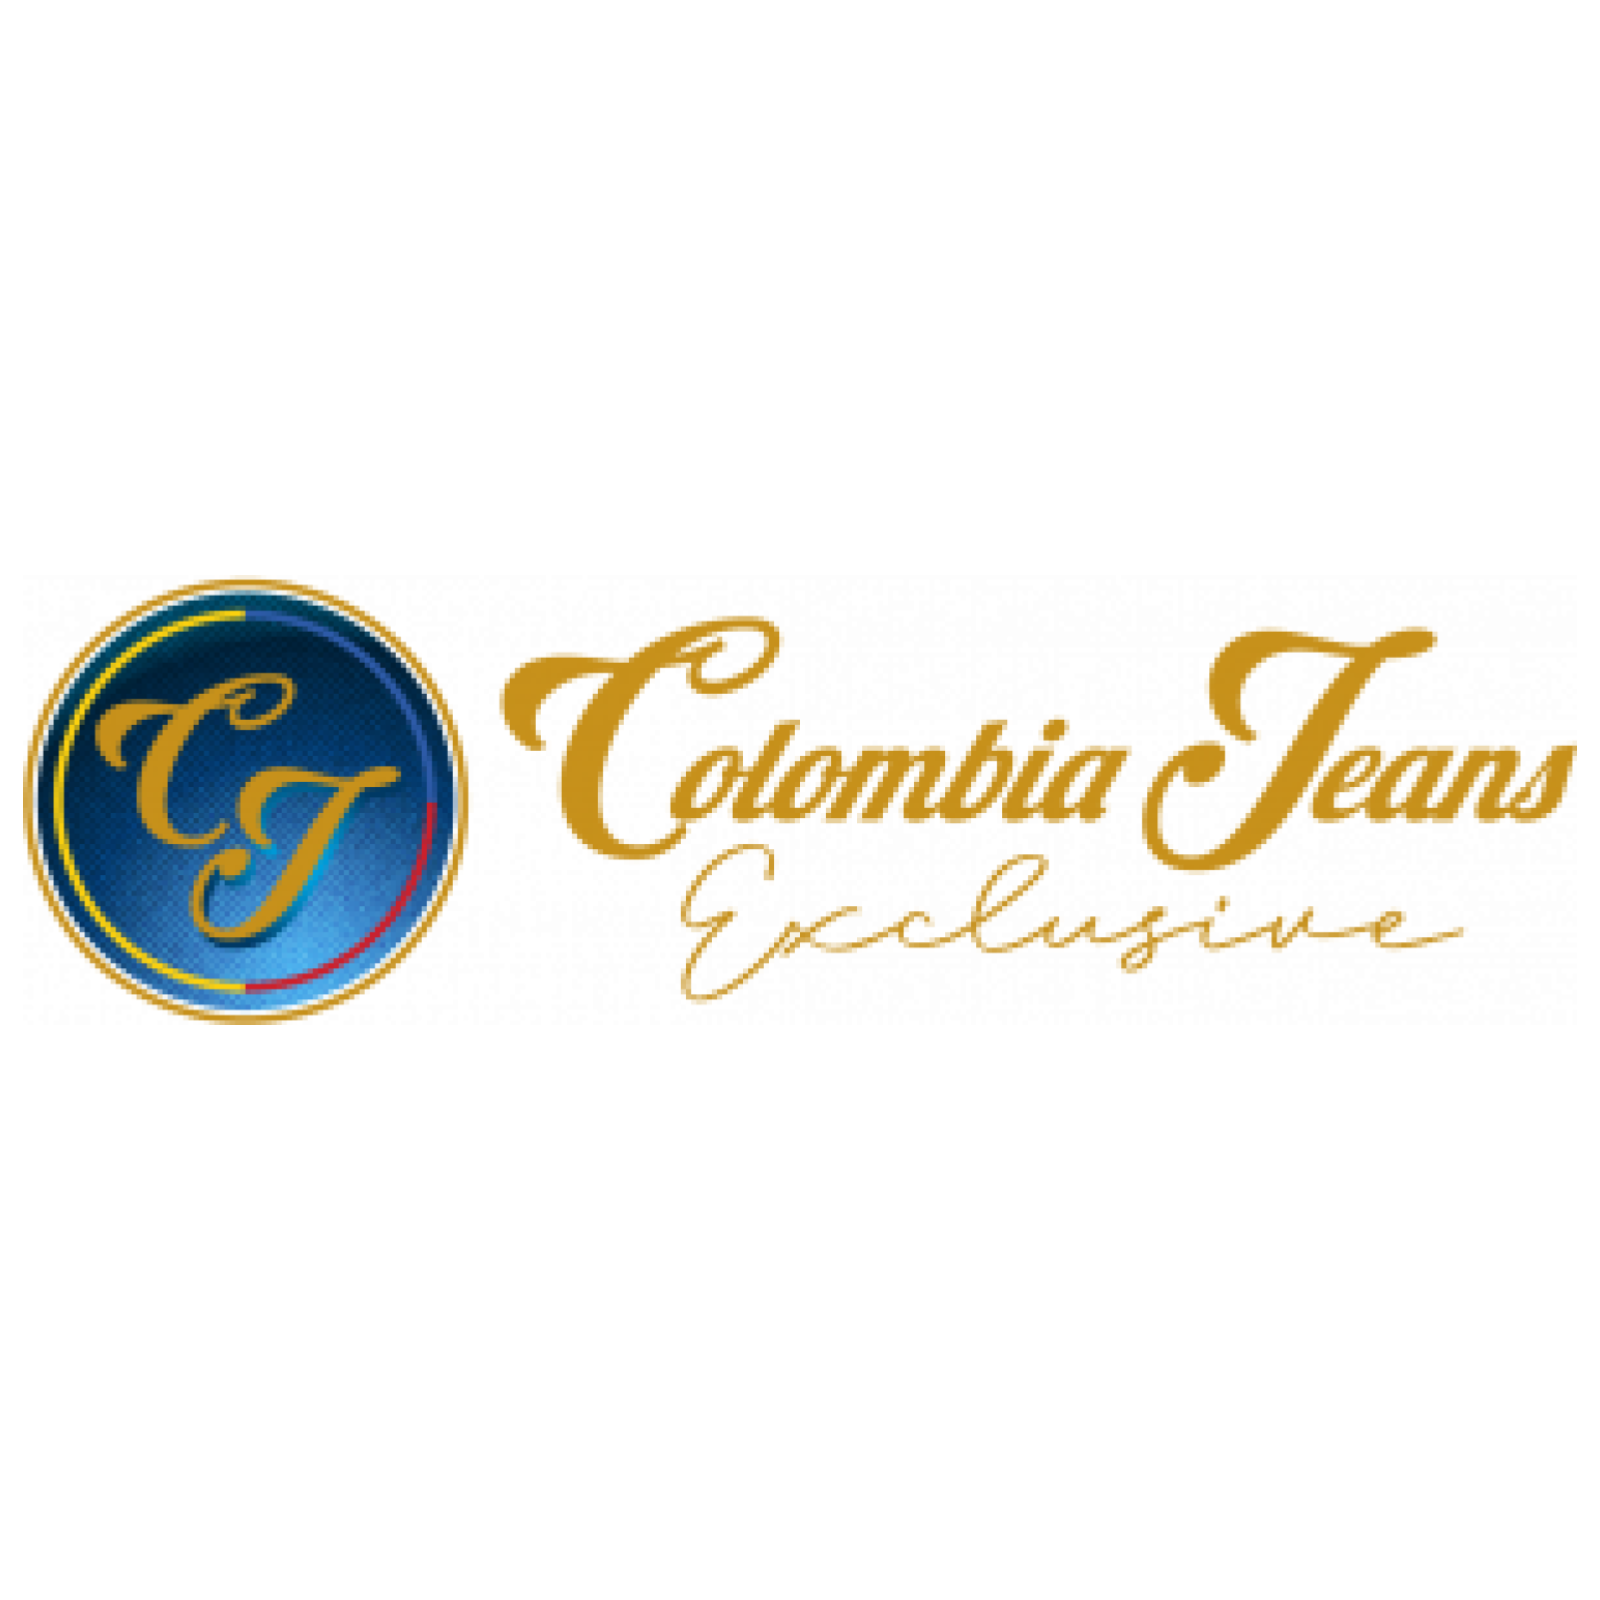 1574 Colombian Jeans – Shop Simply Shapely